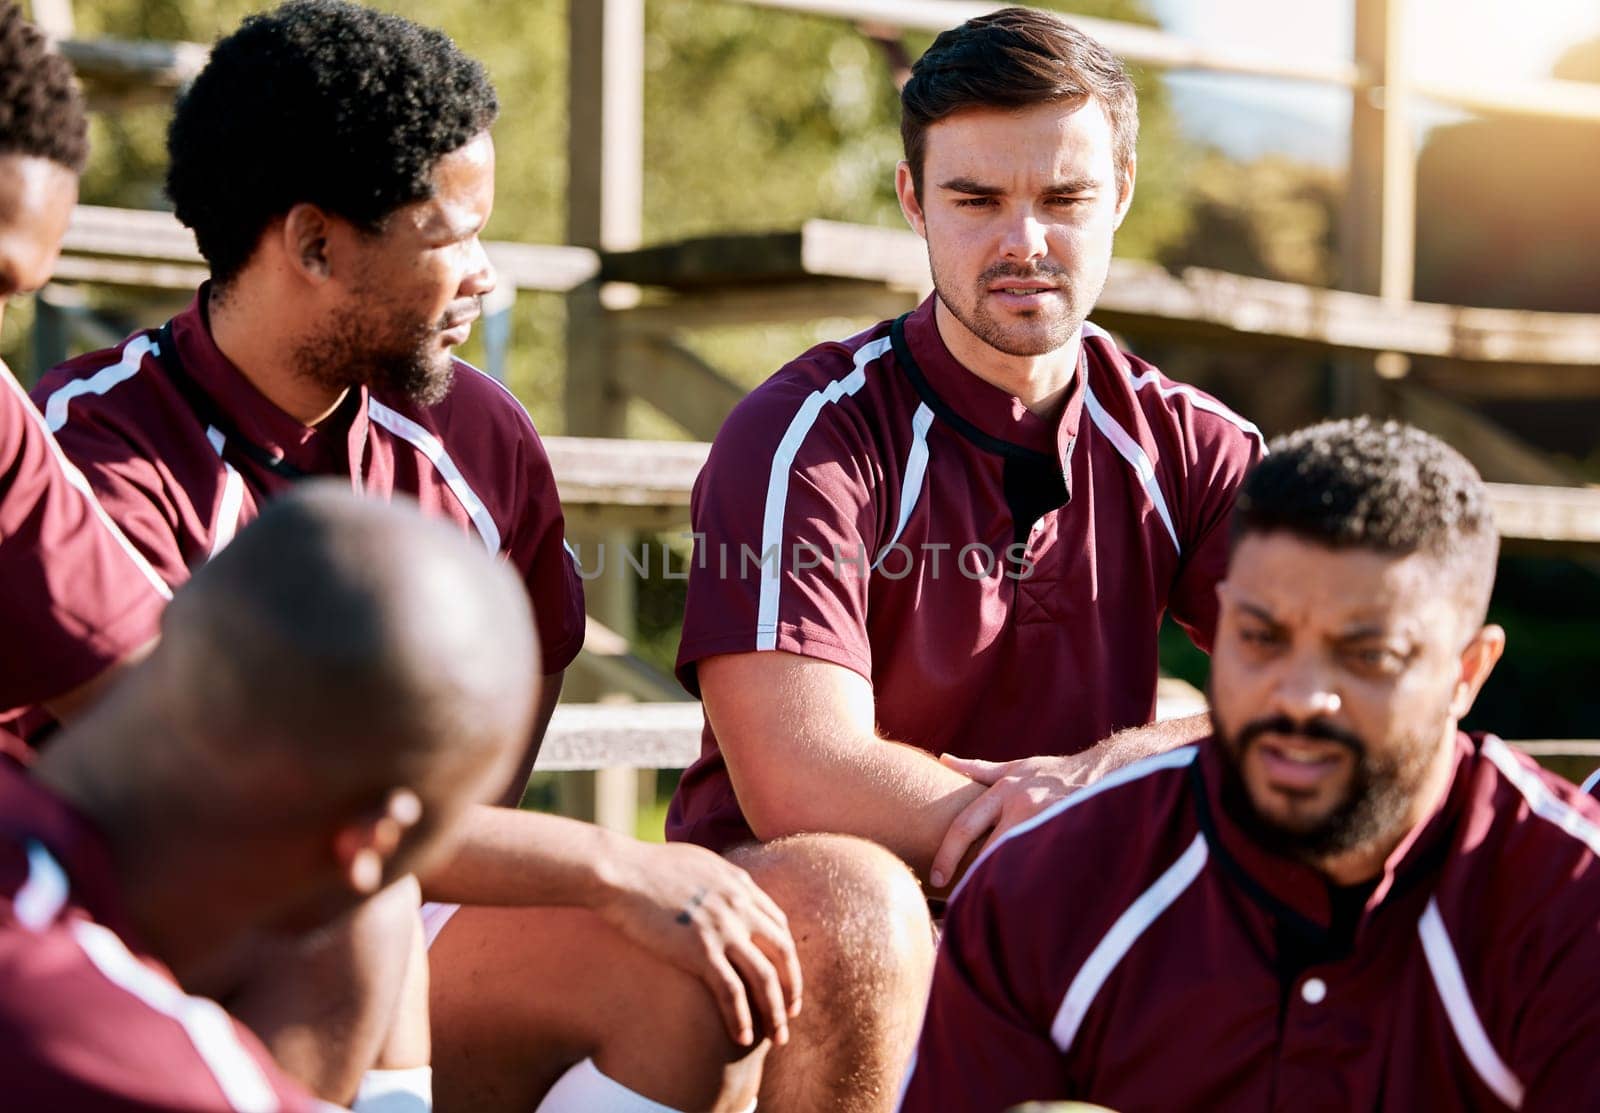 Break, rugby and team of sports men talking, relax and share ideas for training at a field. Fitness, friends and man group discuss game strategy before match, workout and planning practice in huddle.